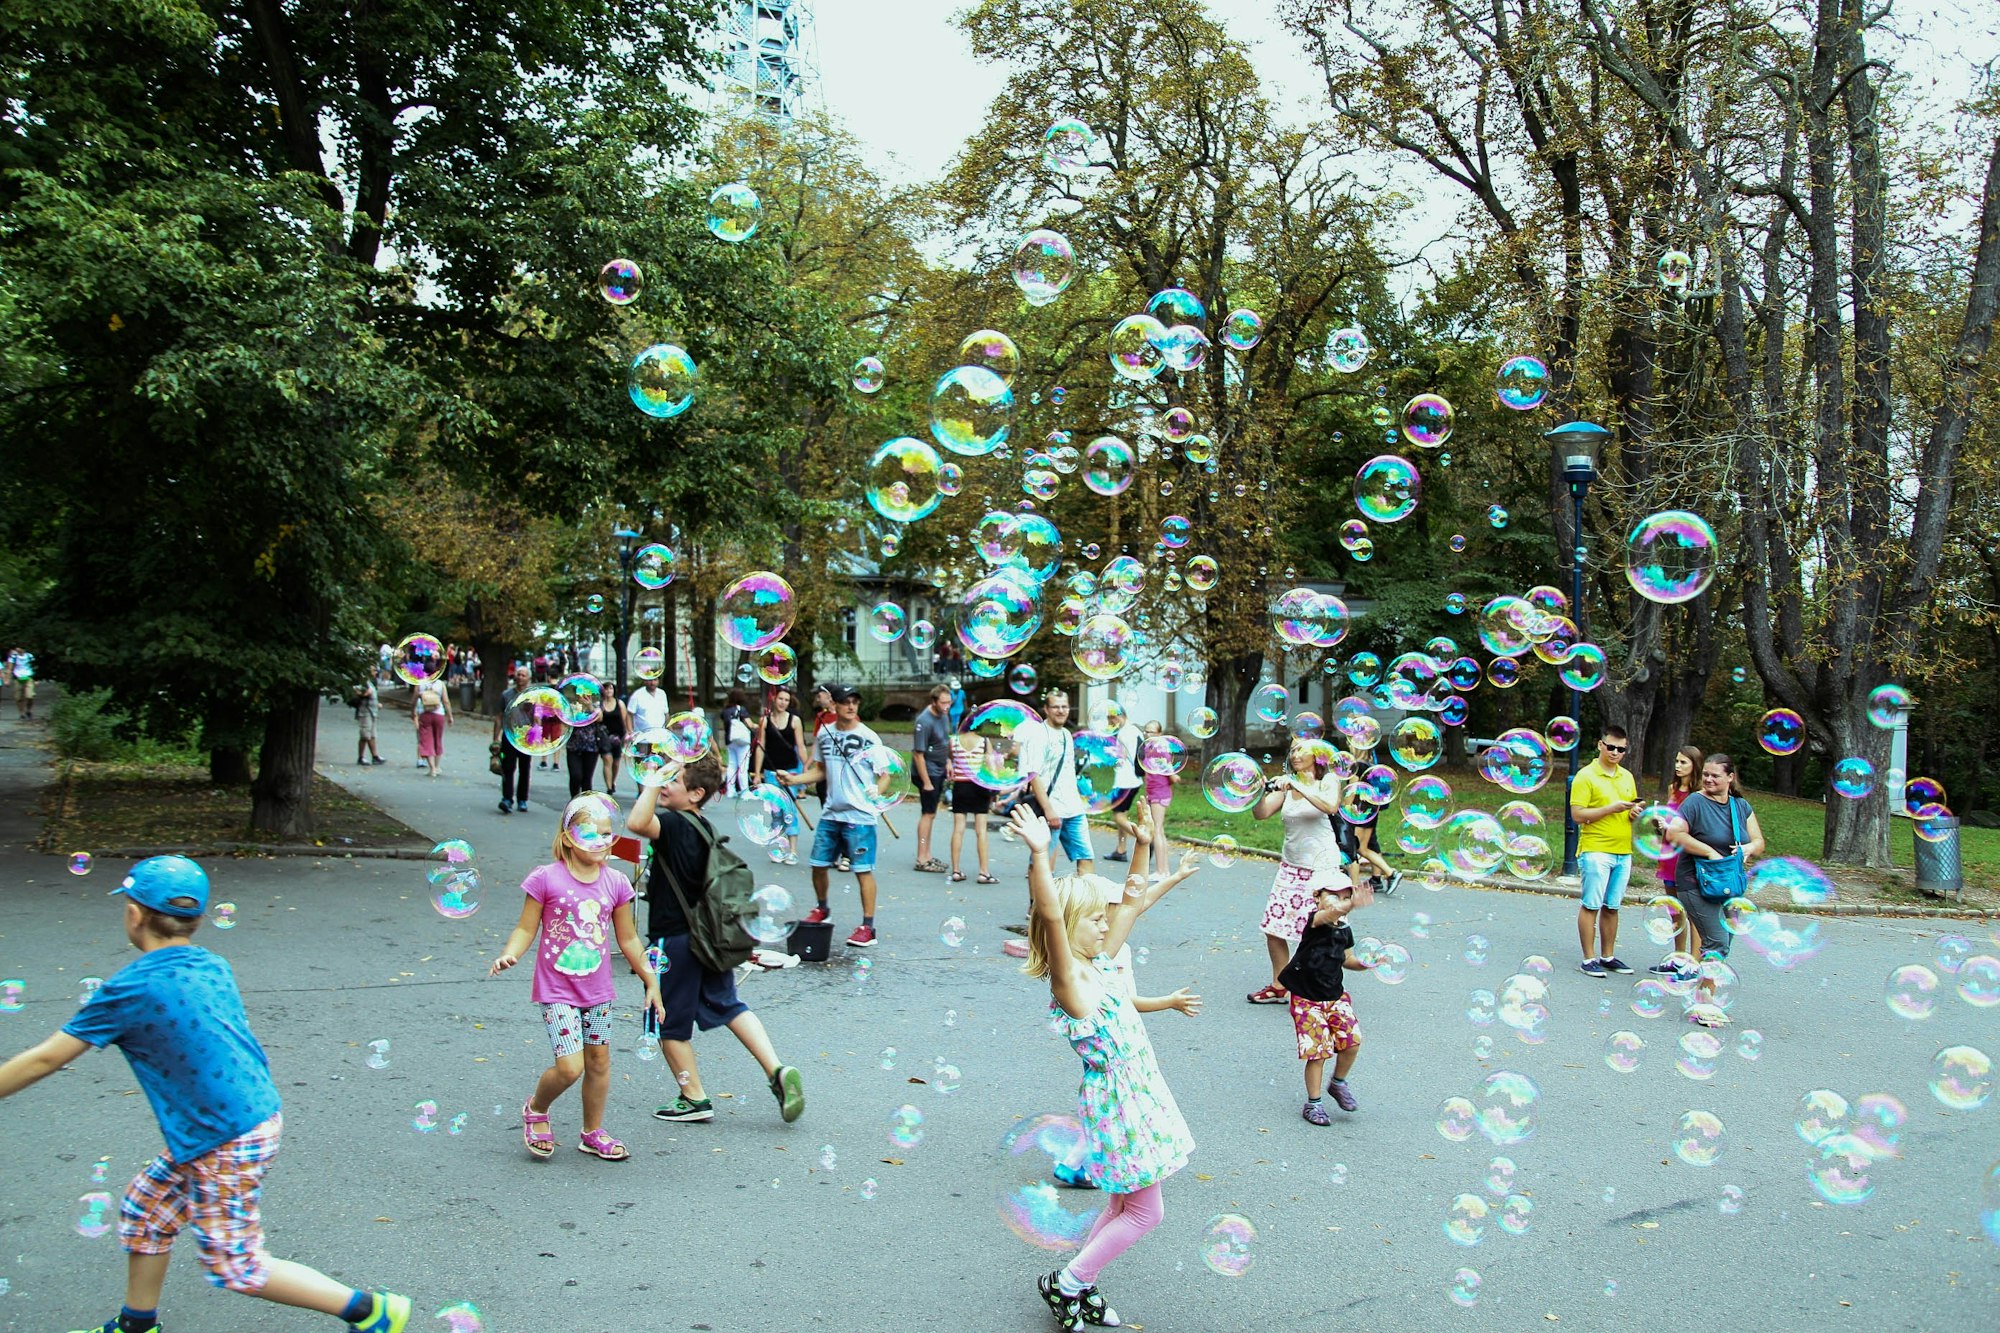 Snapshot of children playing with bubbles on the streets of Prague in Europe